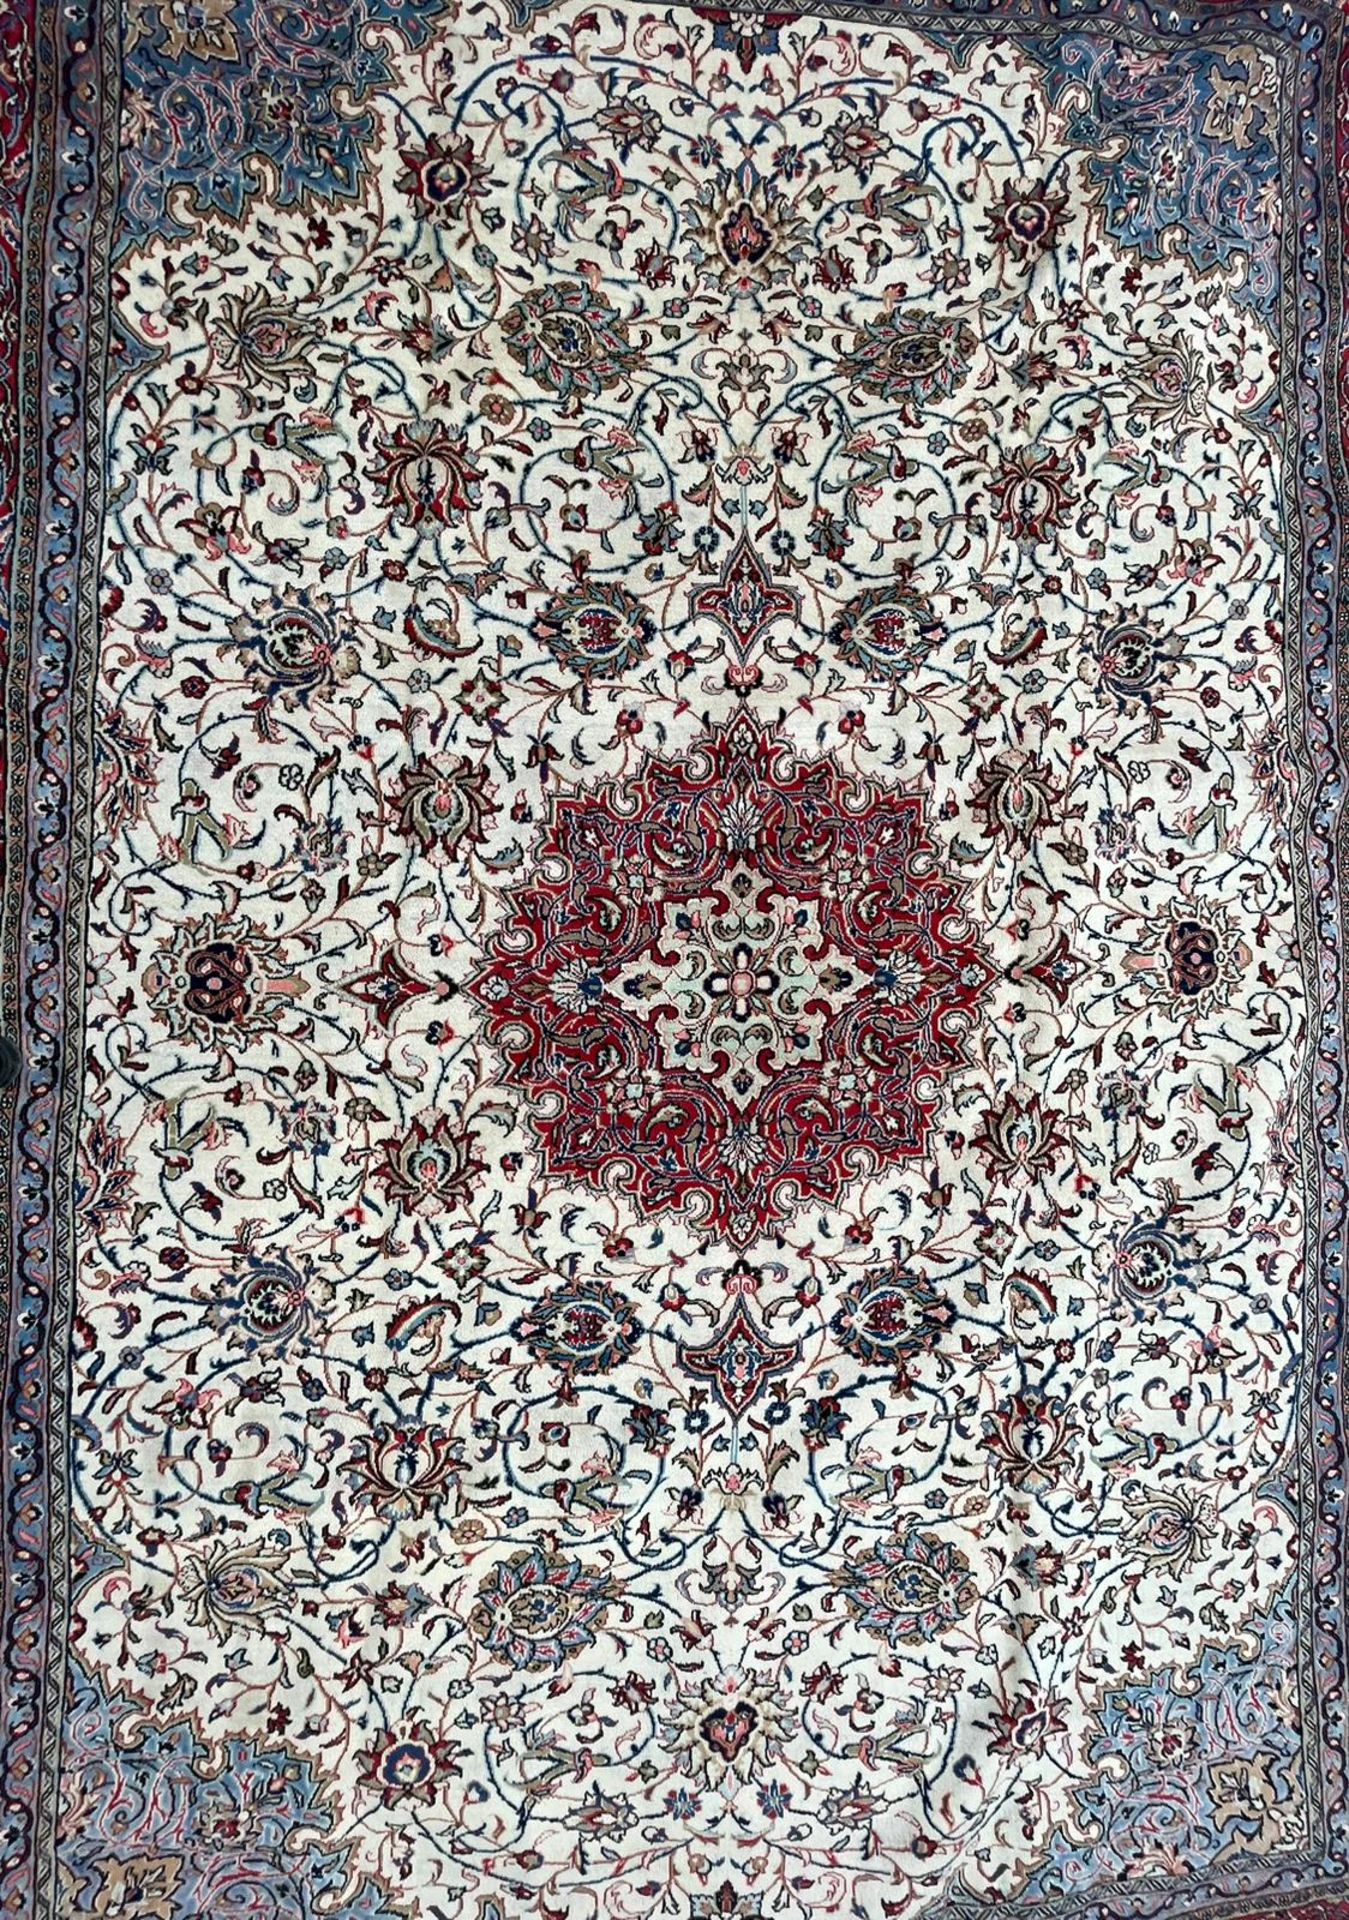 EARLY 20TH CENTURY NORTH WEST PERSIAN SAROUK FLOOR CARPET - Image 7 of 7